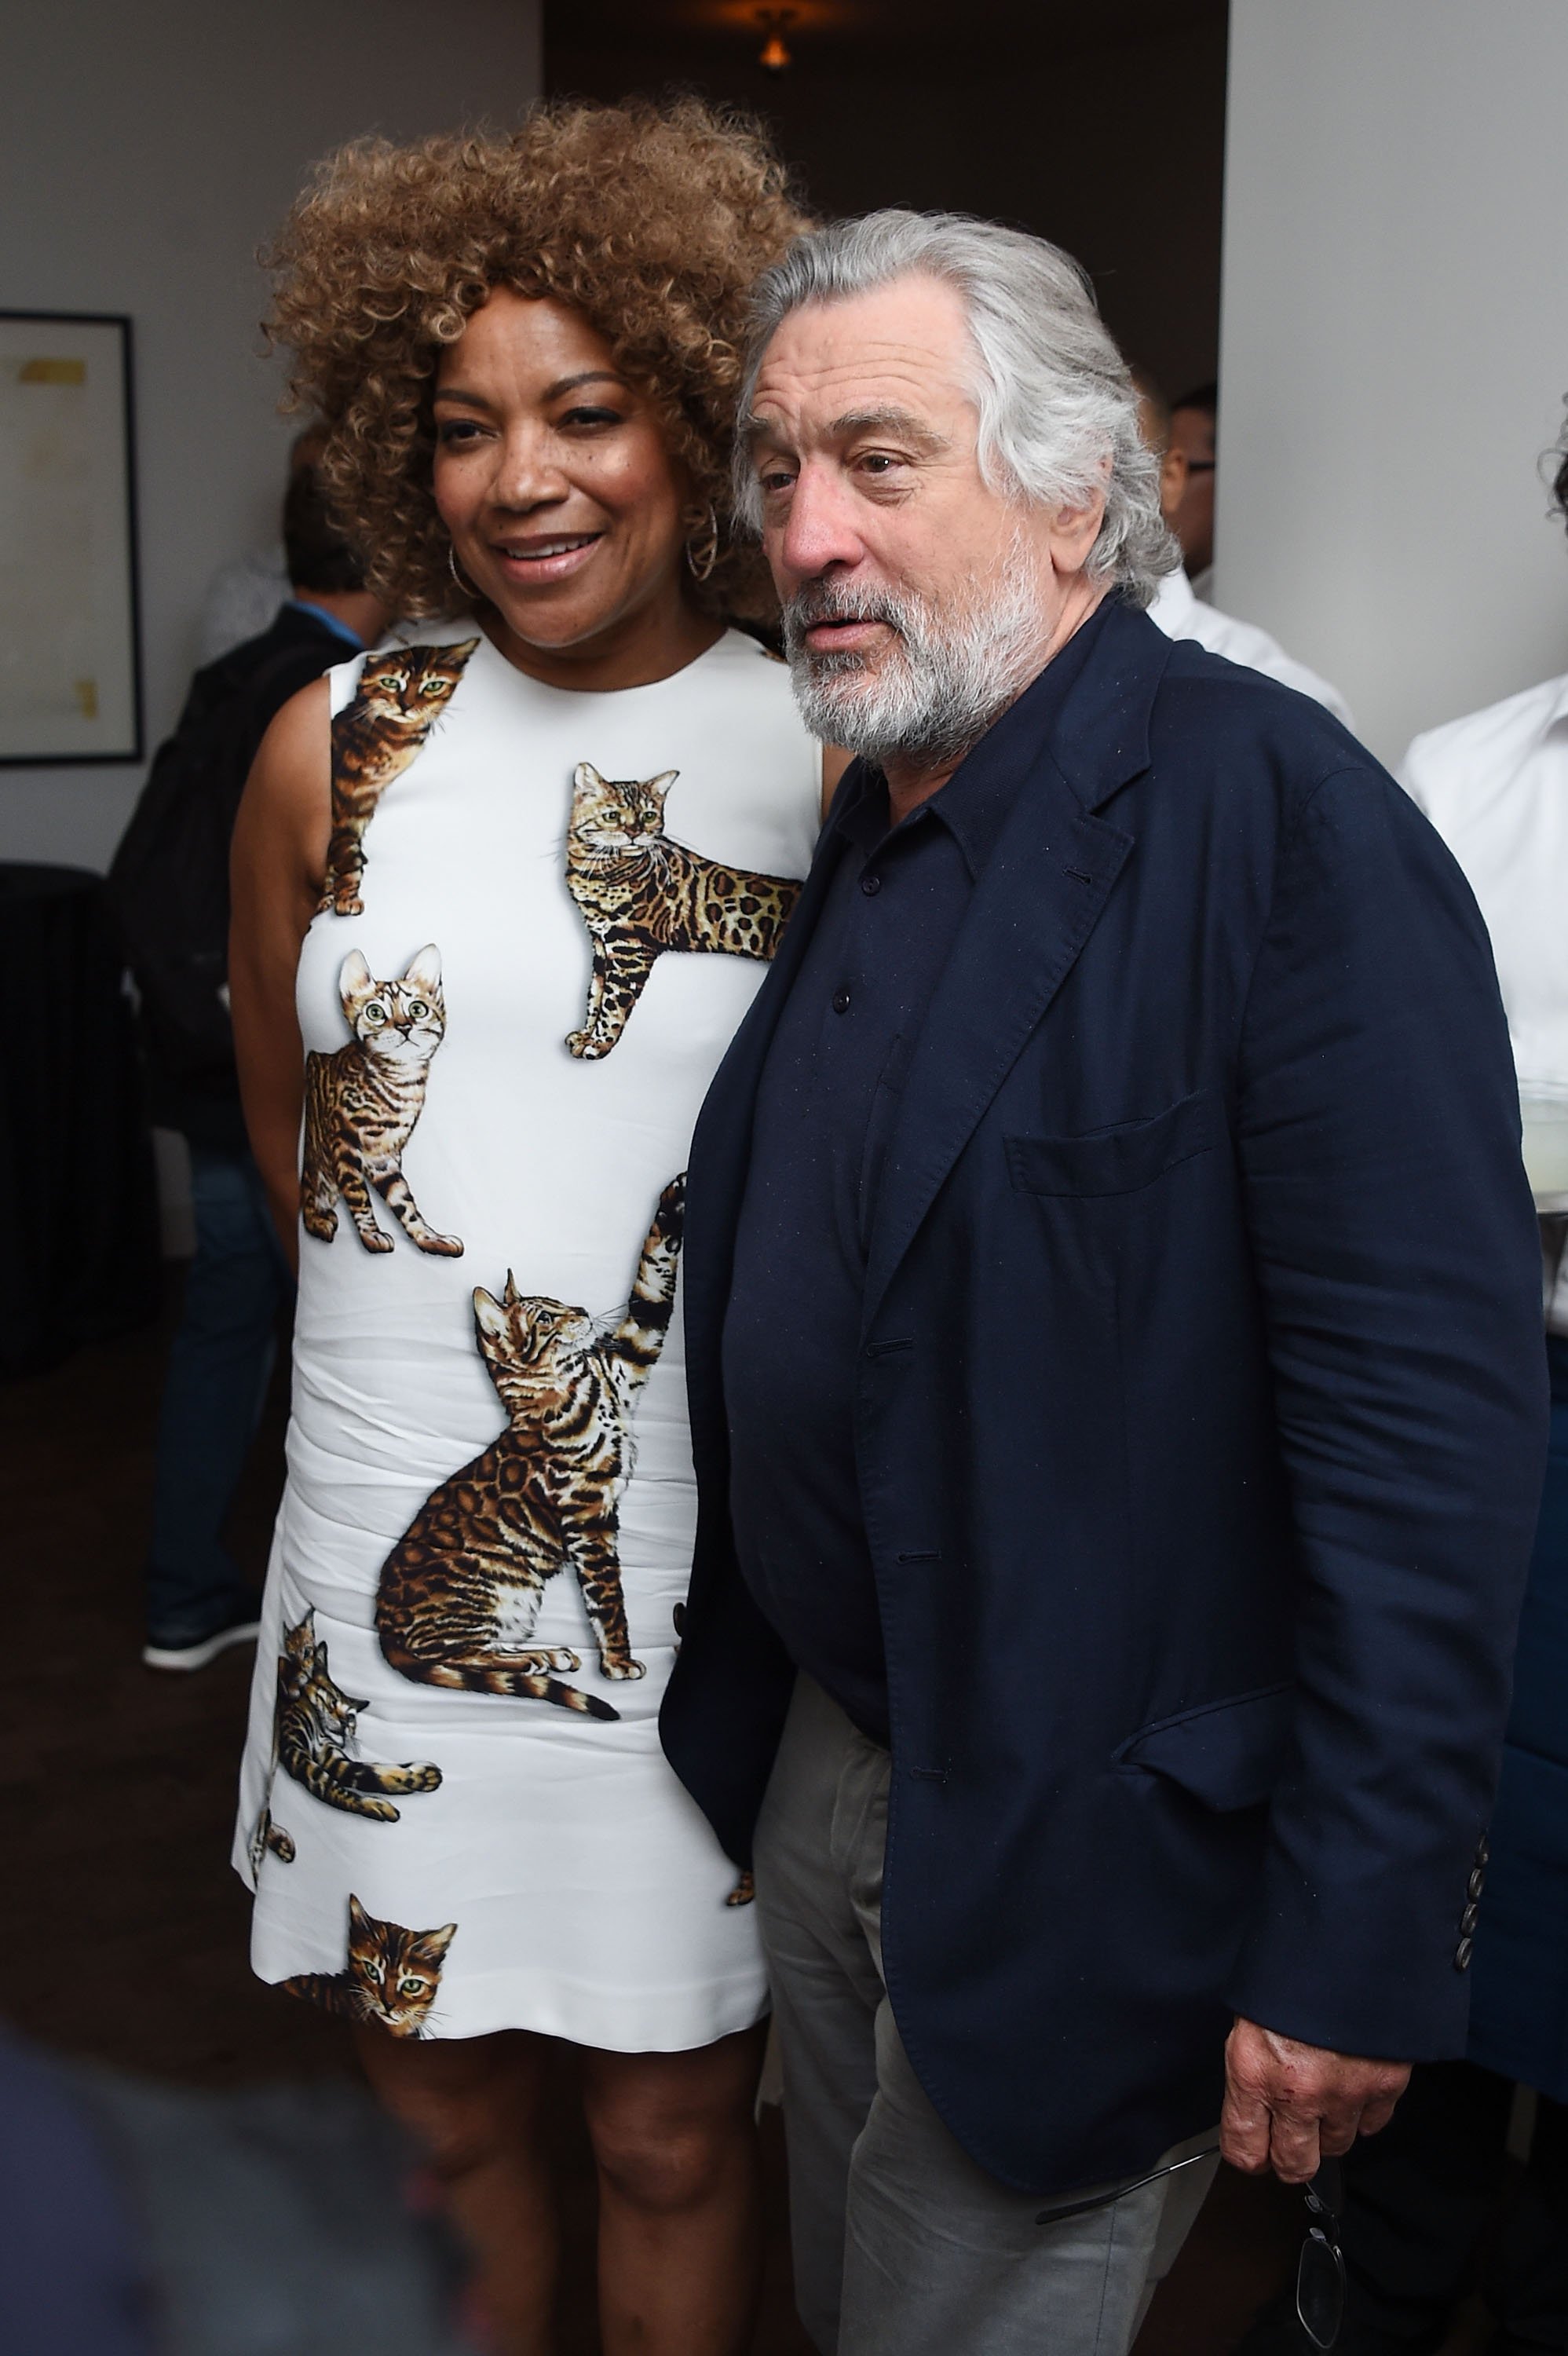 Grace Hightower and Robert De Niro attend the "Hands Of Stone" U.S. premiere after party at The Redbury New York on August 22, 2016, in New York City. | Source: Getty Images.